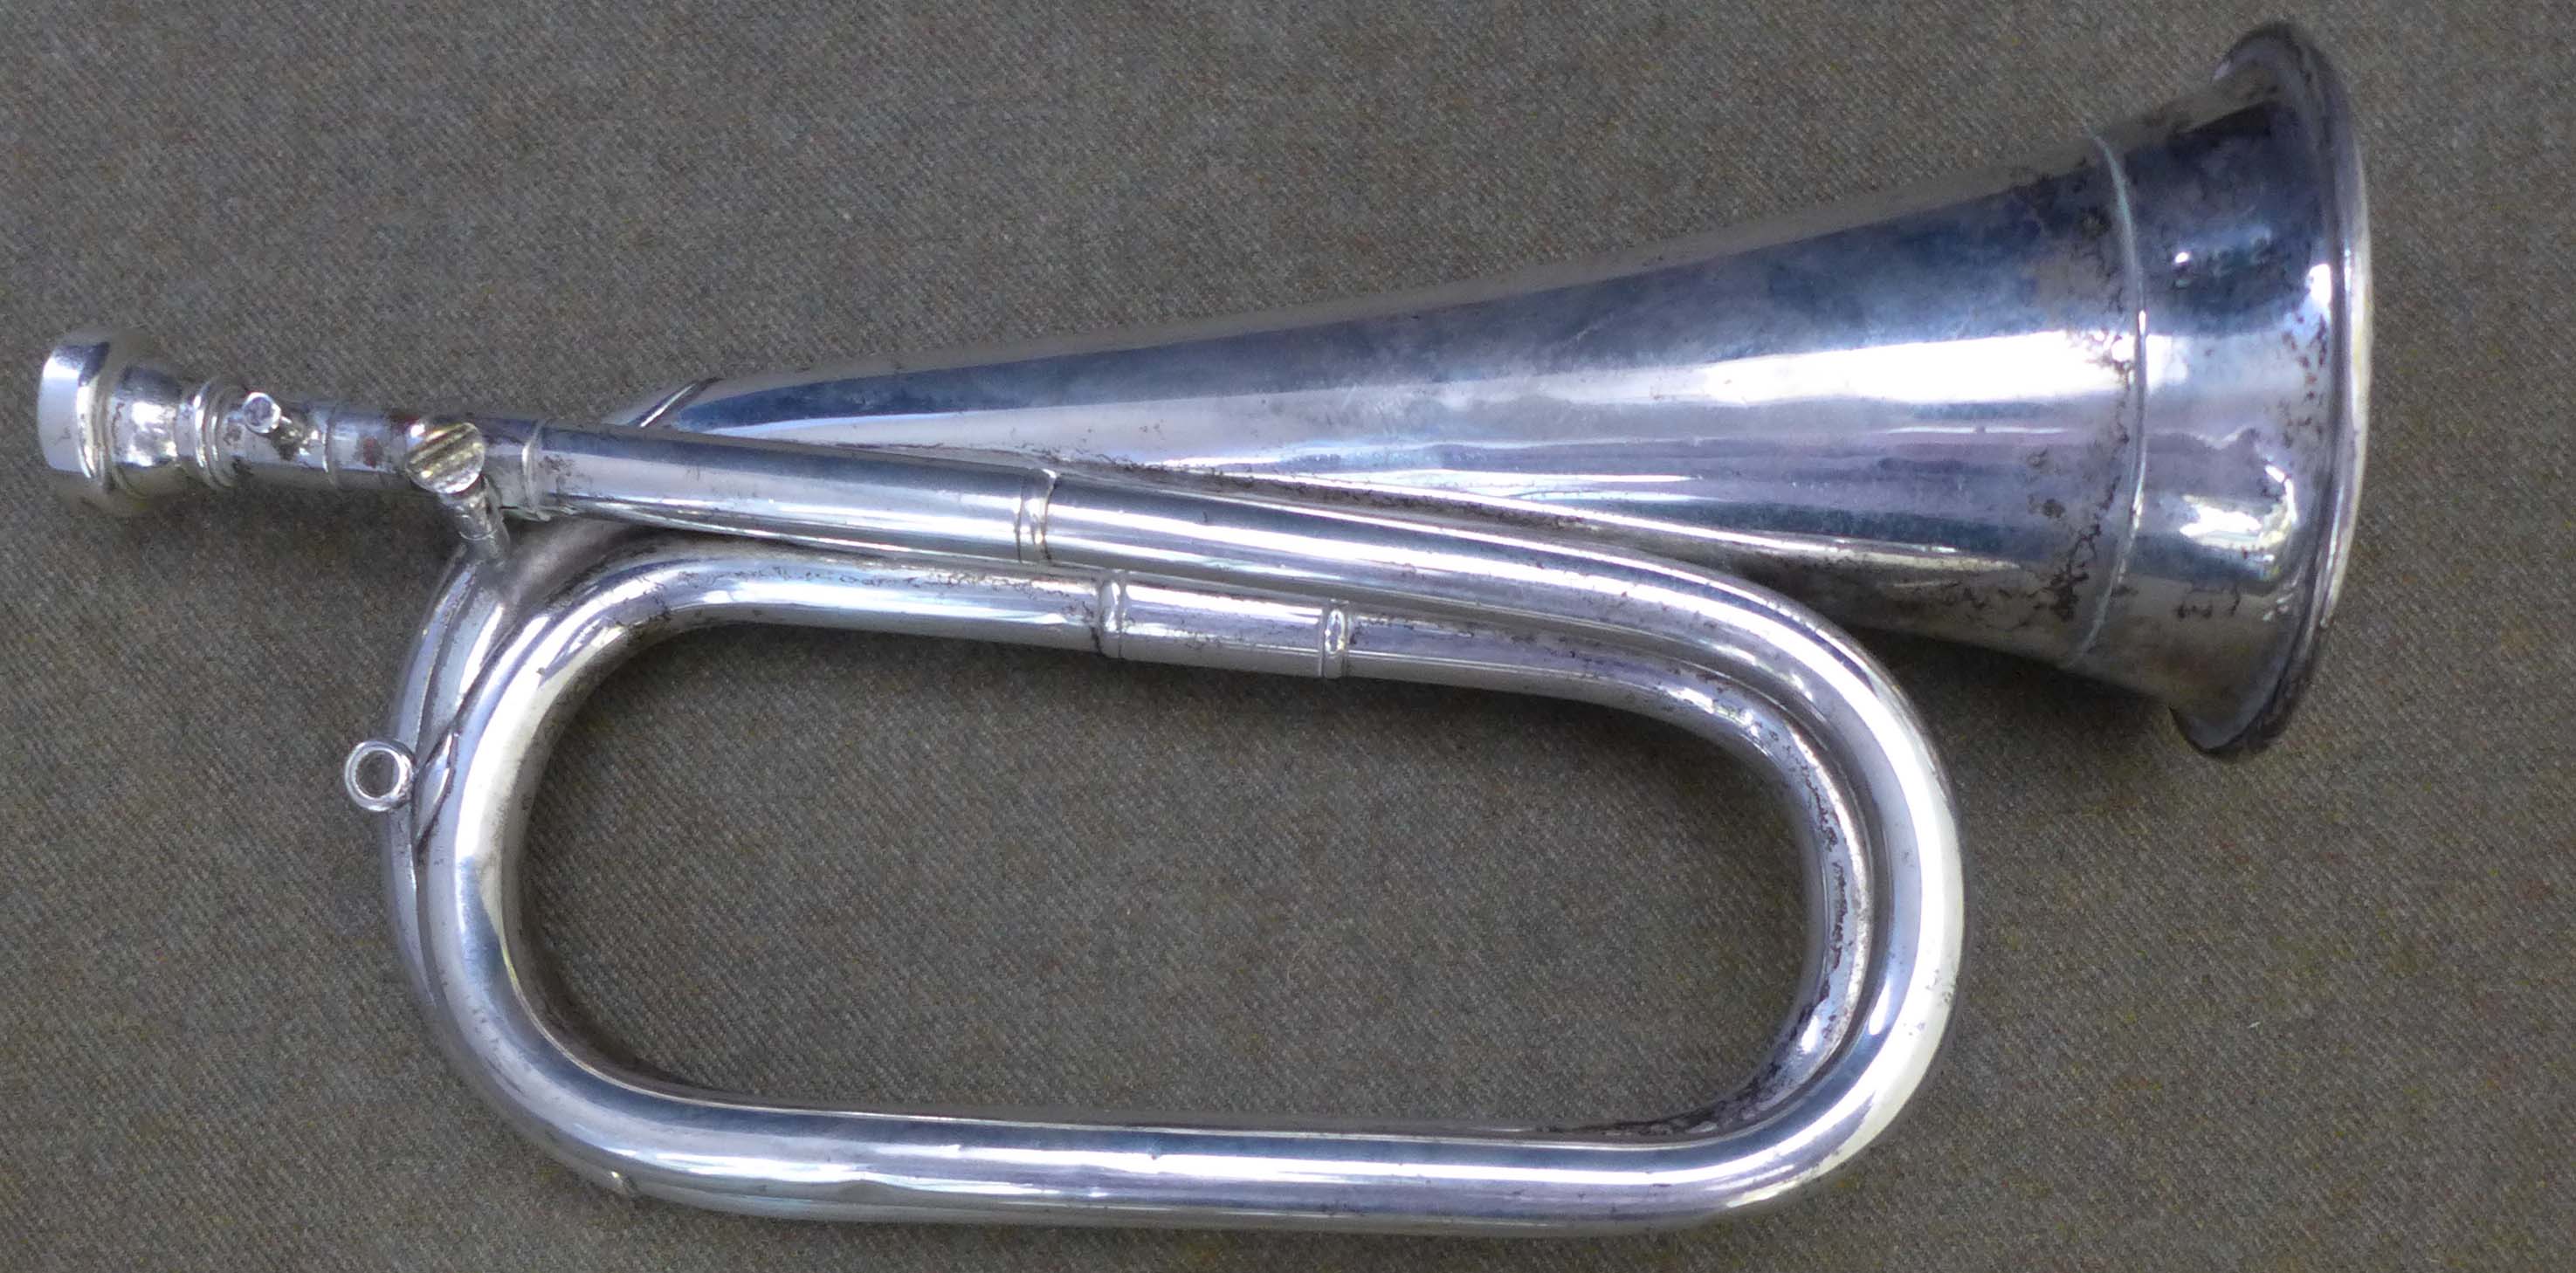 A plated tunable bugle by Barratts, according to the vendor he used this whilst in the Royal Marines